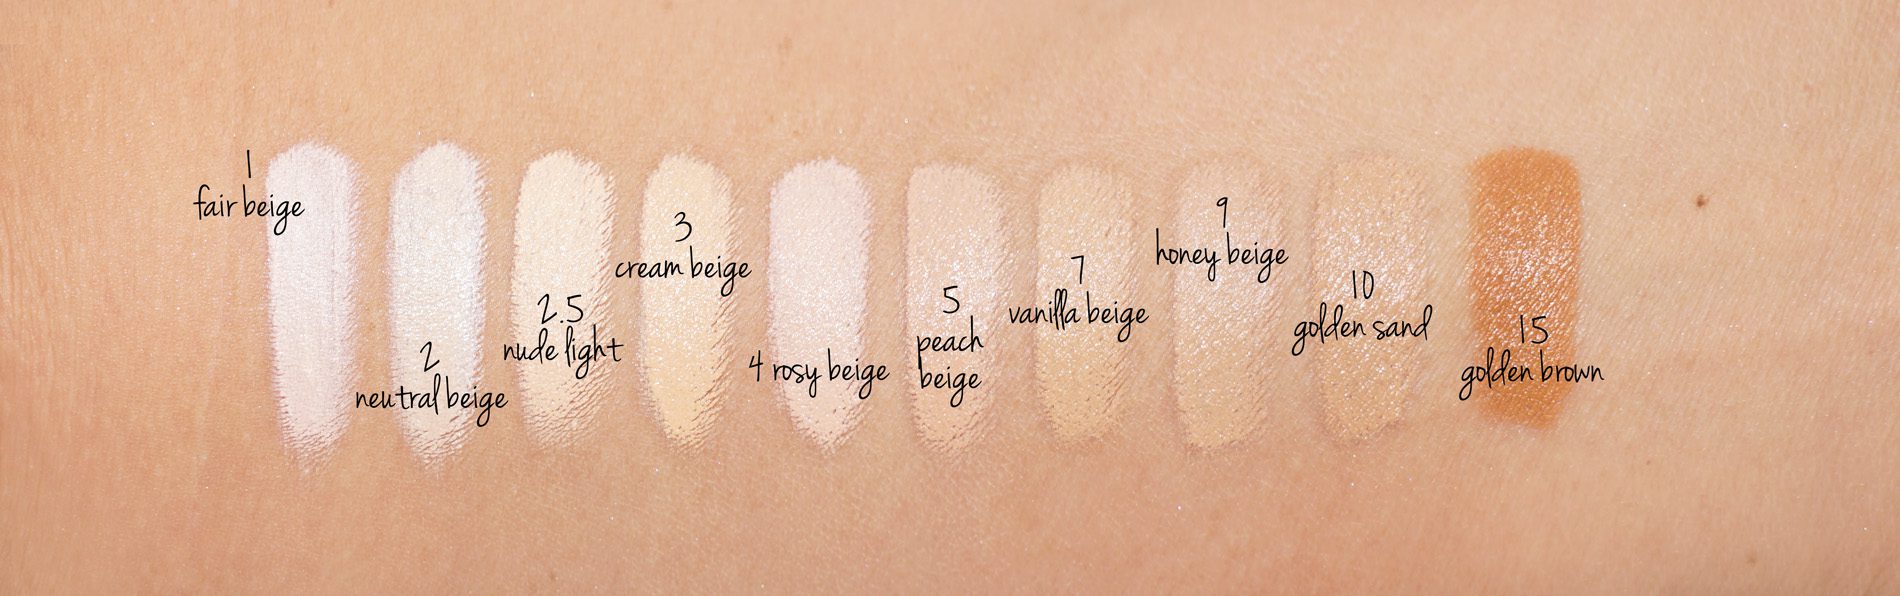 By Terry Nude-Expert Duo Stick Foundation Review + Swatches - The